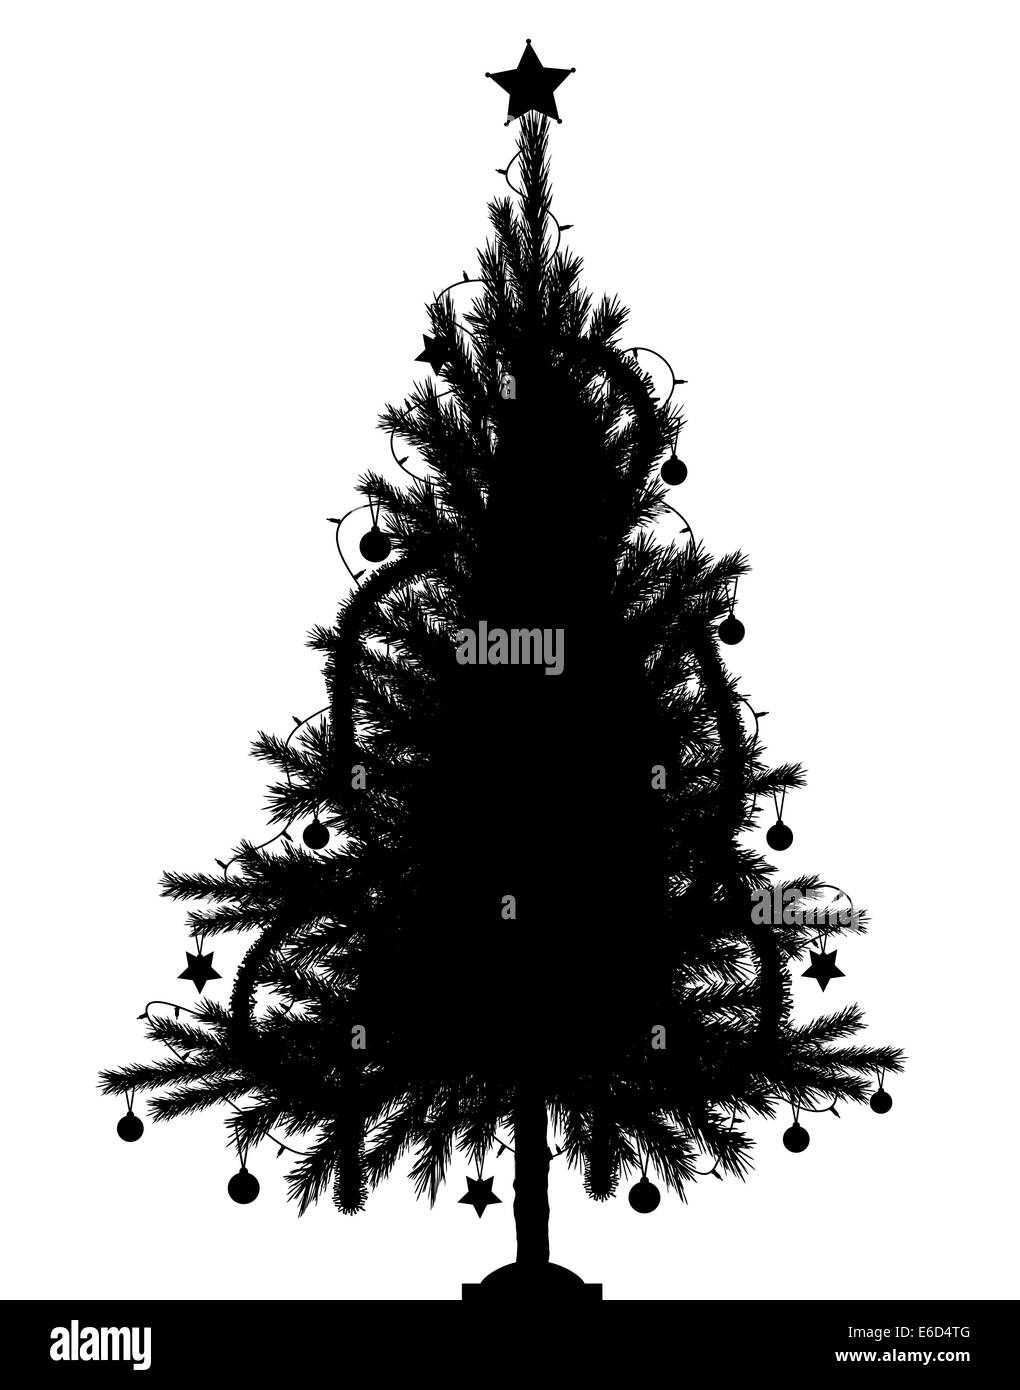 Editable vector silhouette of a detailed Christmas tree with tree and decorations as separate objects Stock Vector